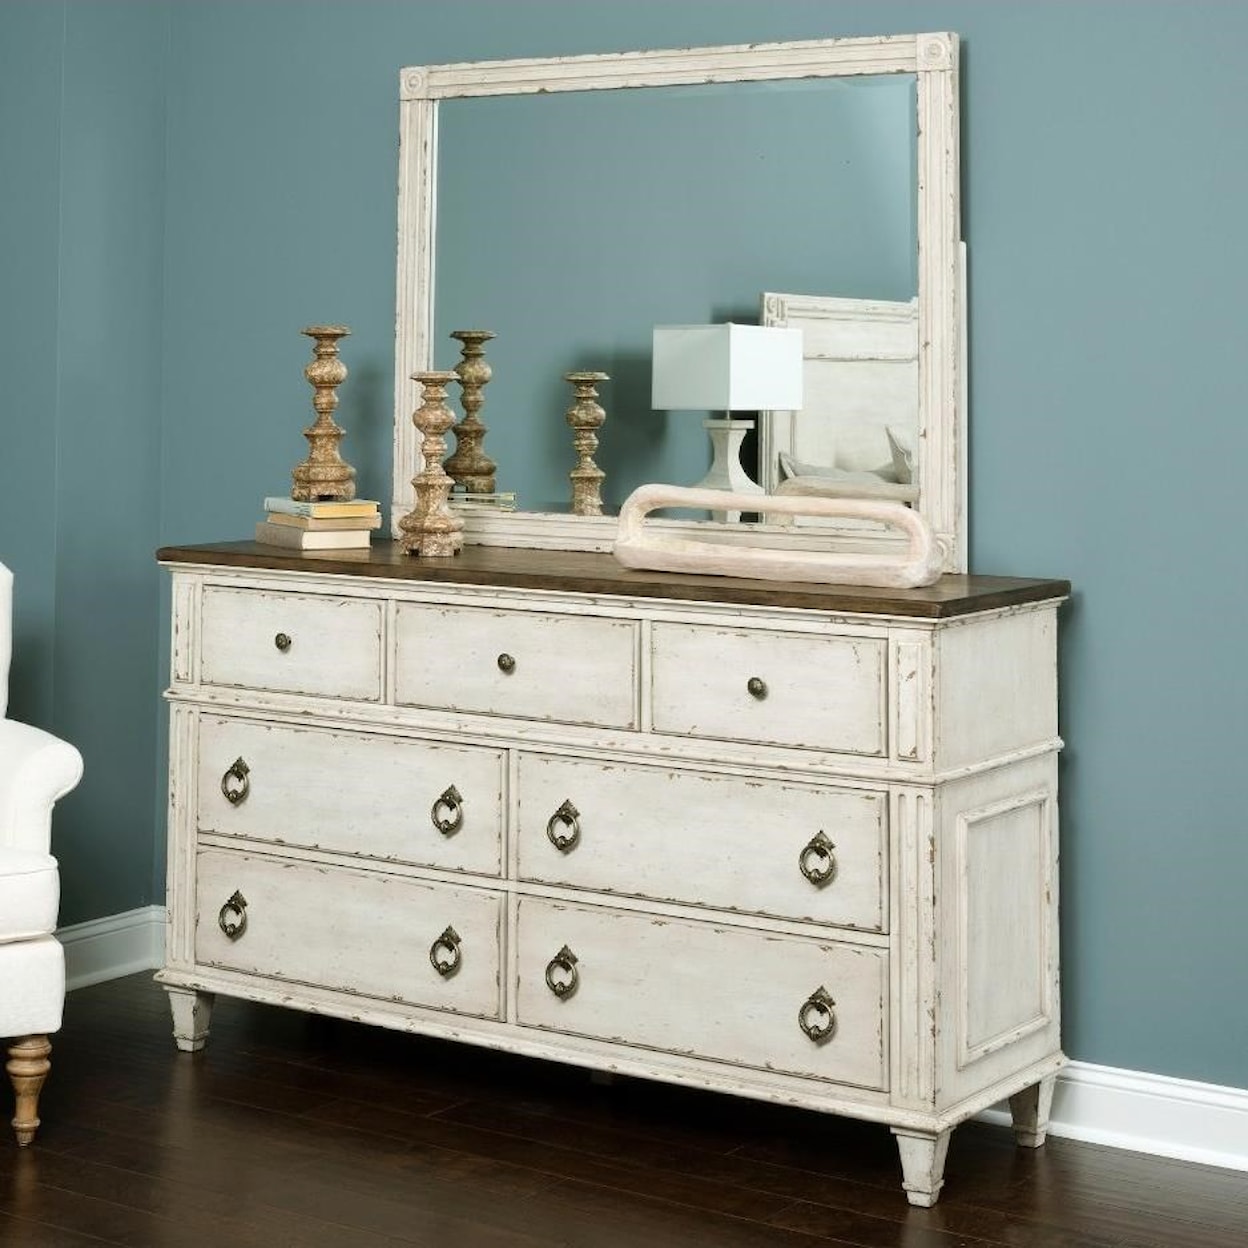 American Drew SOUTHBURY Dresser and Mirror with Wood Frame